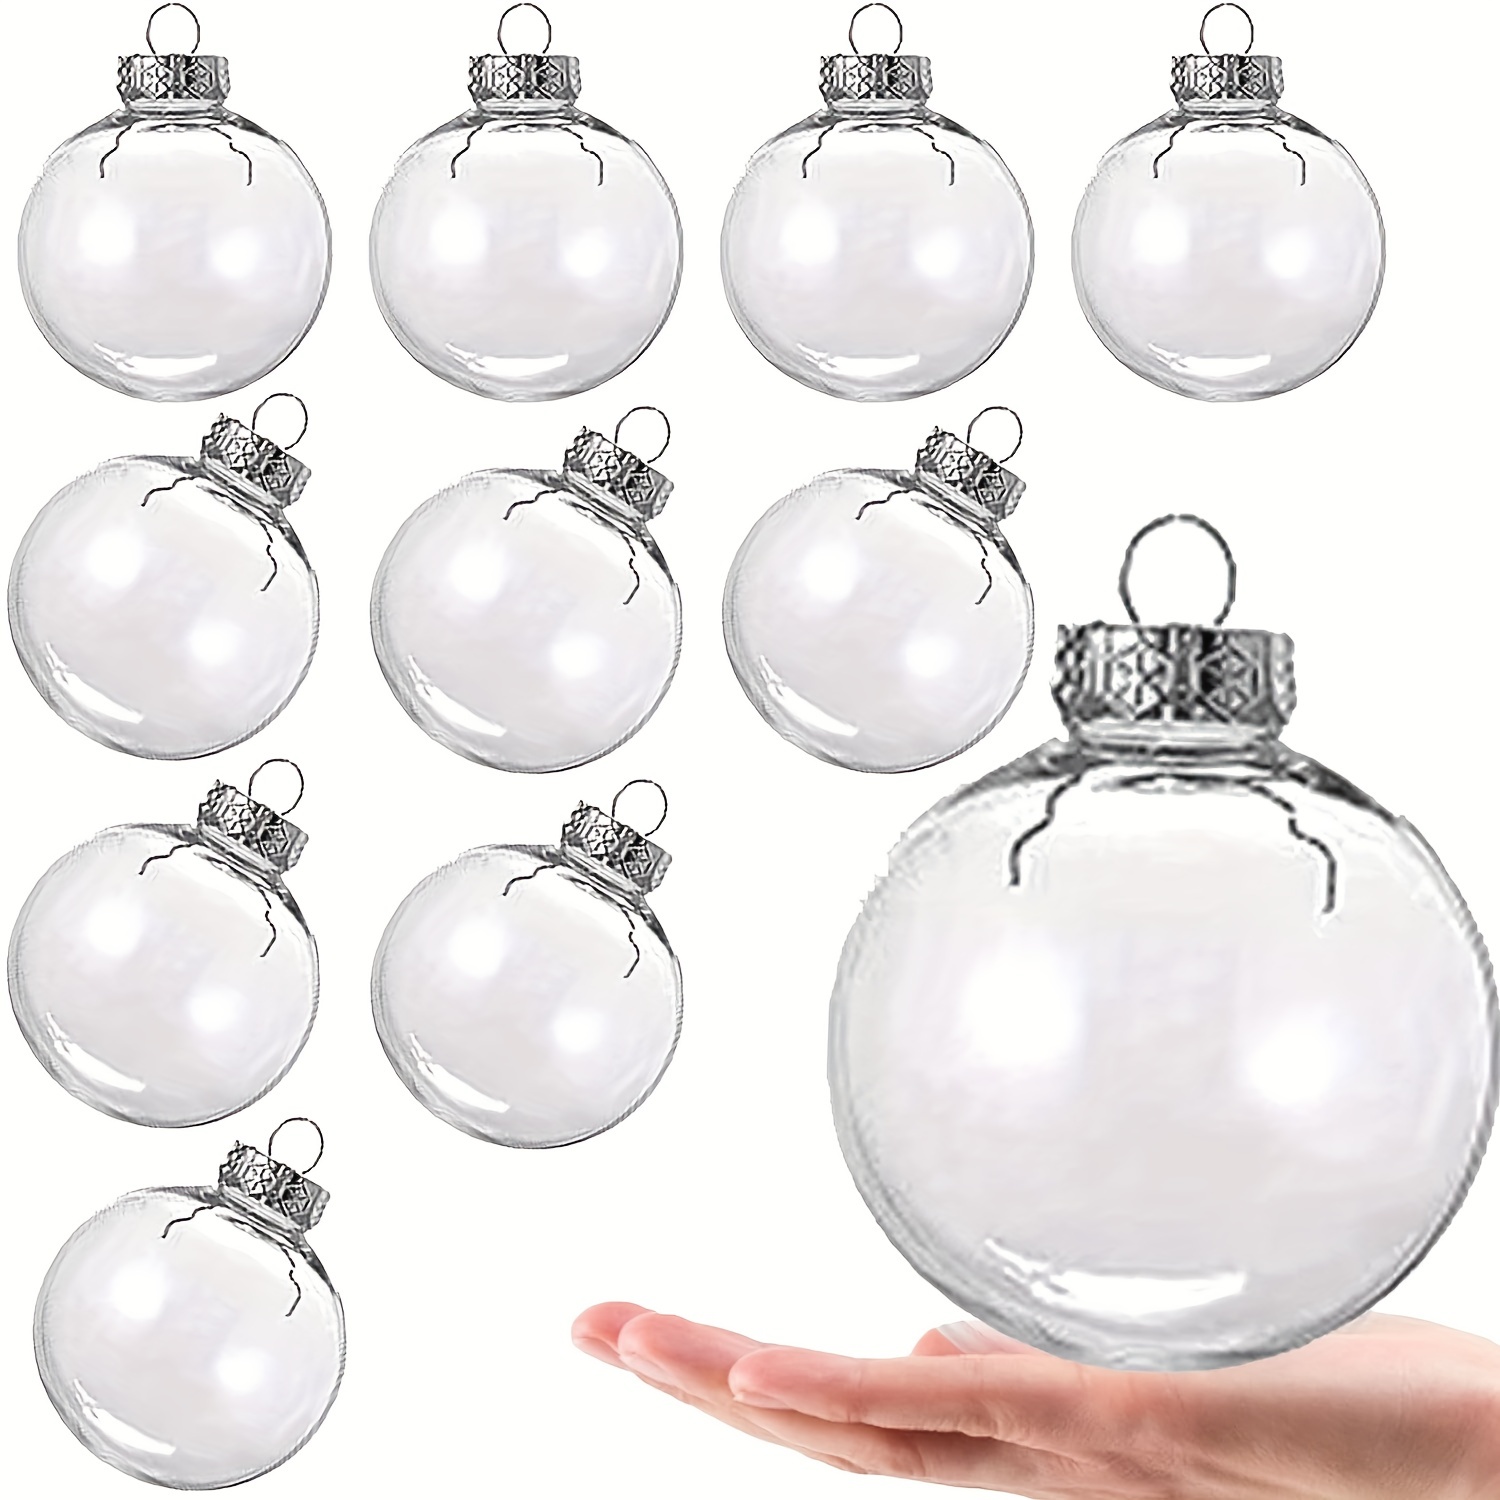  24pcs(3.15 Inch/80mm) Clear Ornaments for Crafts Fillable,Clear  Plastic Fillable Ornament,DIY Fillable Christmas Ornaments Balls for  Christmas Tree,Clear Christmas Ornaments Balls(Round) : Home & Kitchen